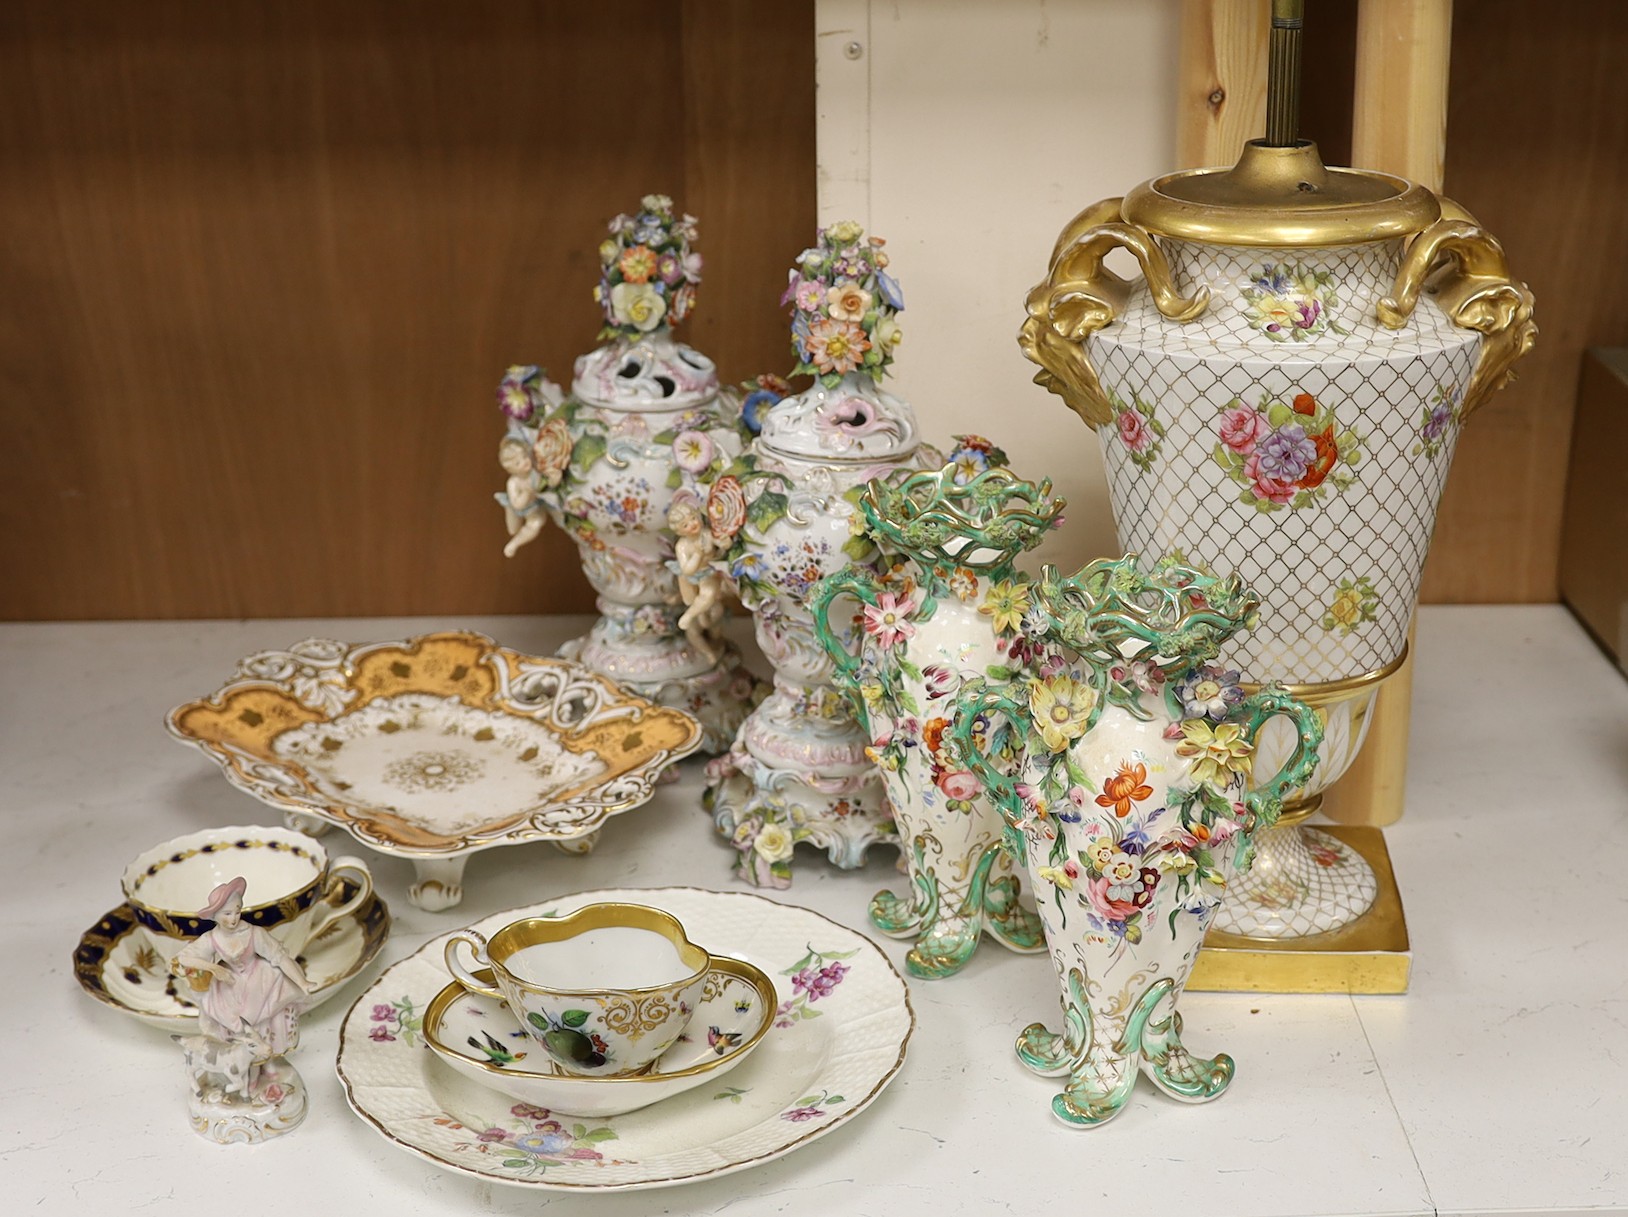 A mixed collection of floral encrusted 19th century and later Continental porcelain